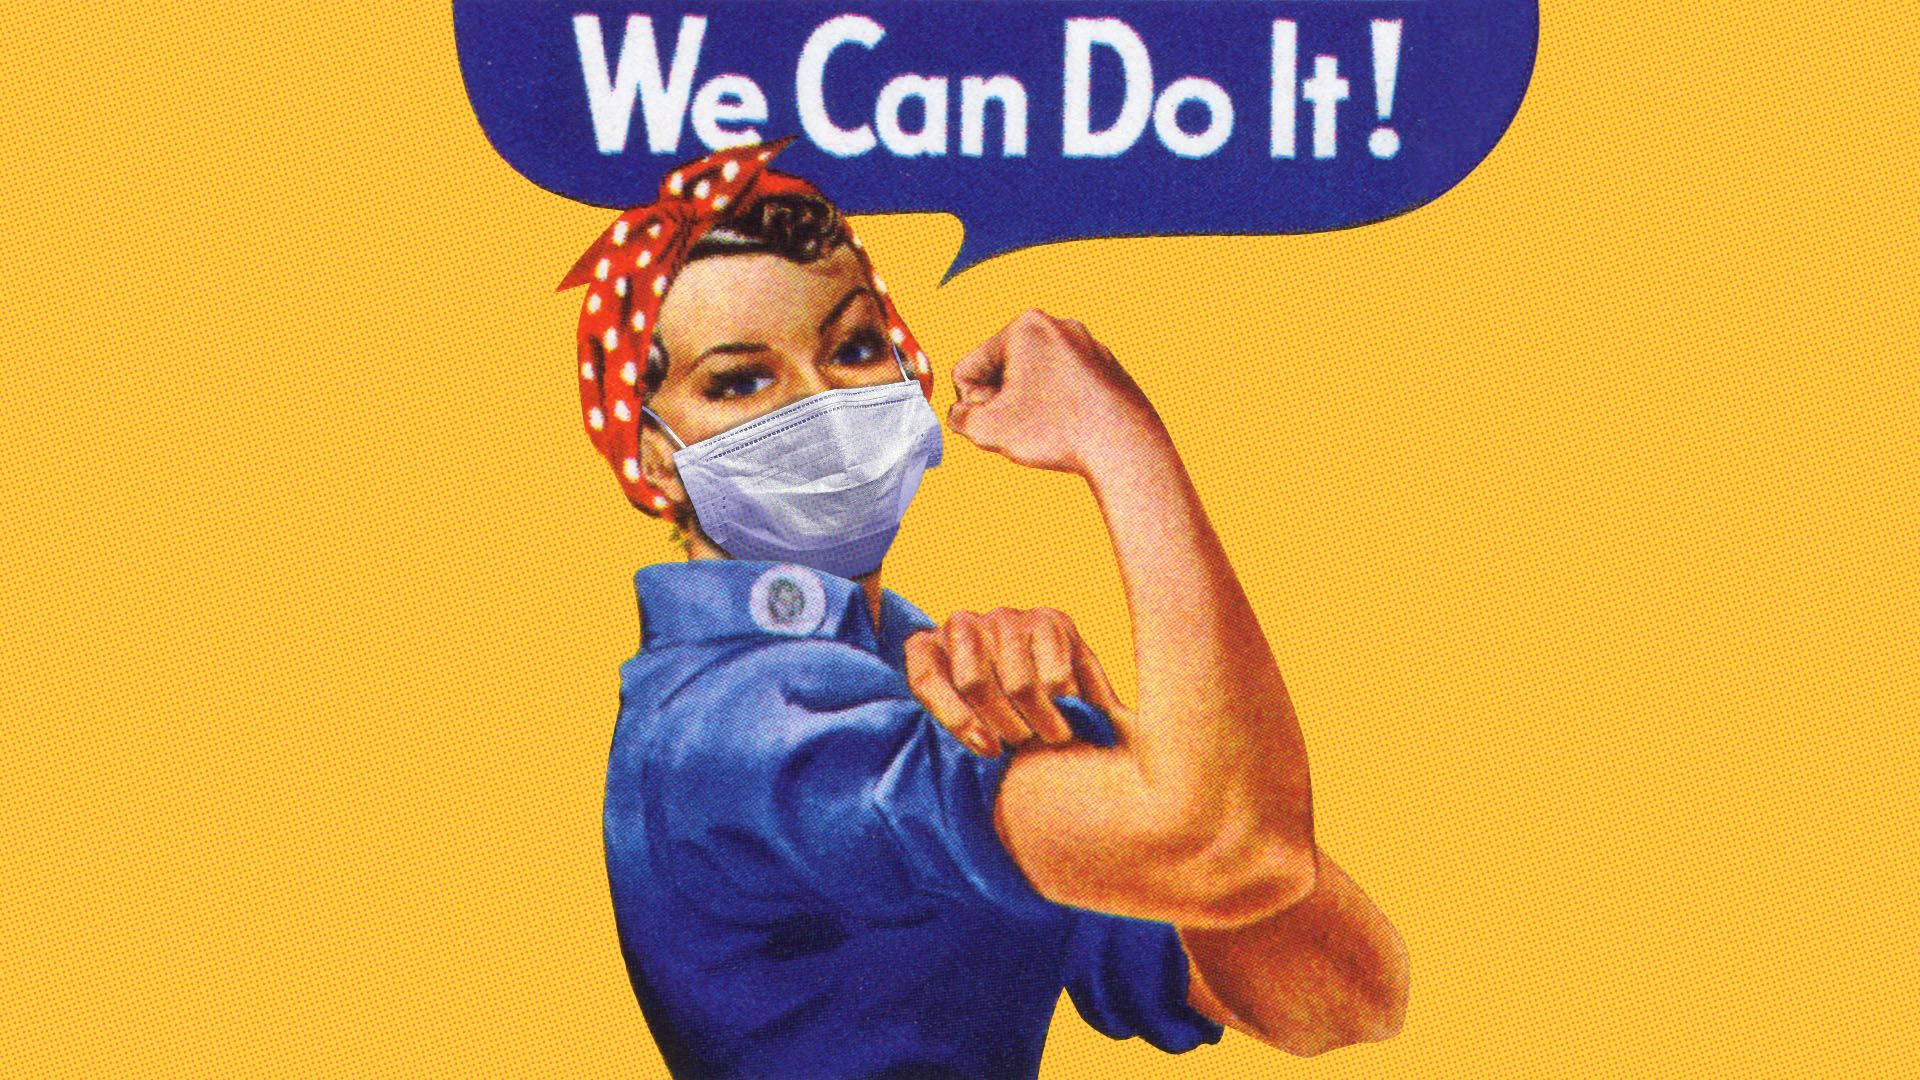 Illustration of the Rosie the Riveter poster wearing a medical mask 